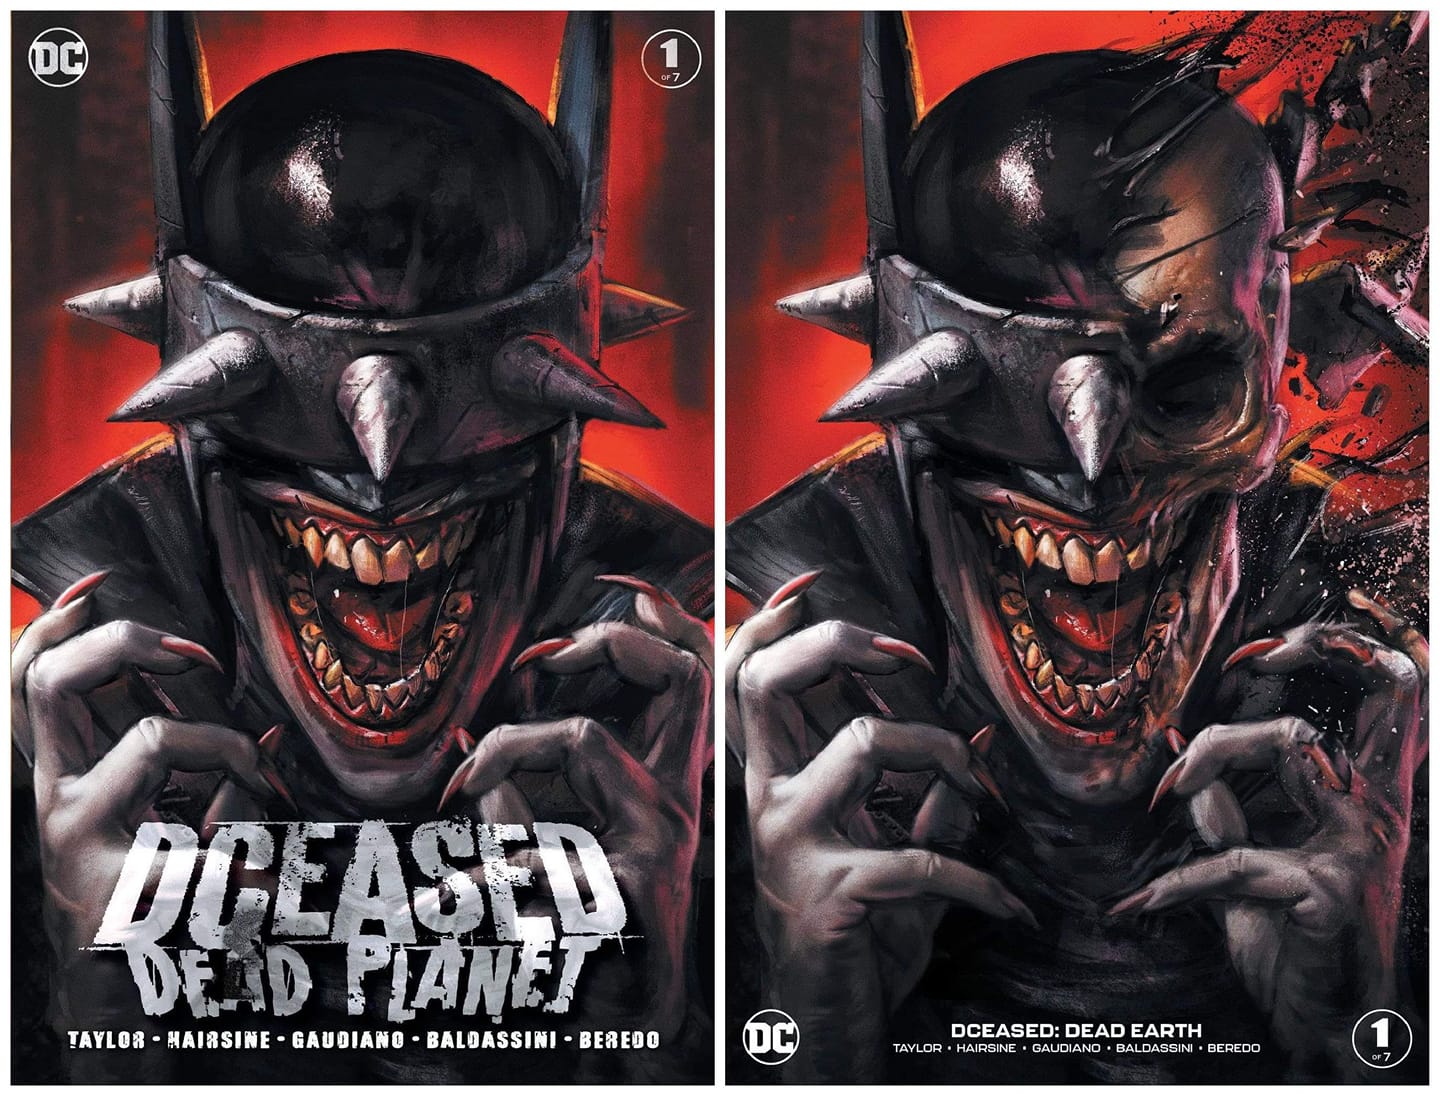 DCEASED DEAD PLANET #1 IAN MACDONALD TRADE/MINIMAL VARIANT SET LIMITED TO 600 SETS WITH NUMBERED COA